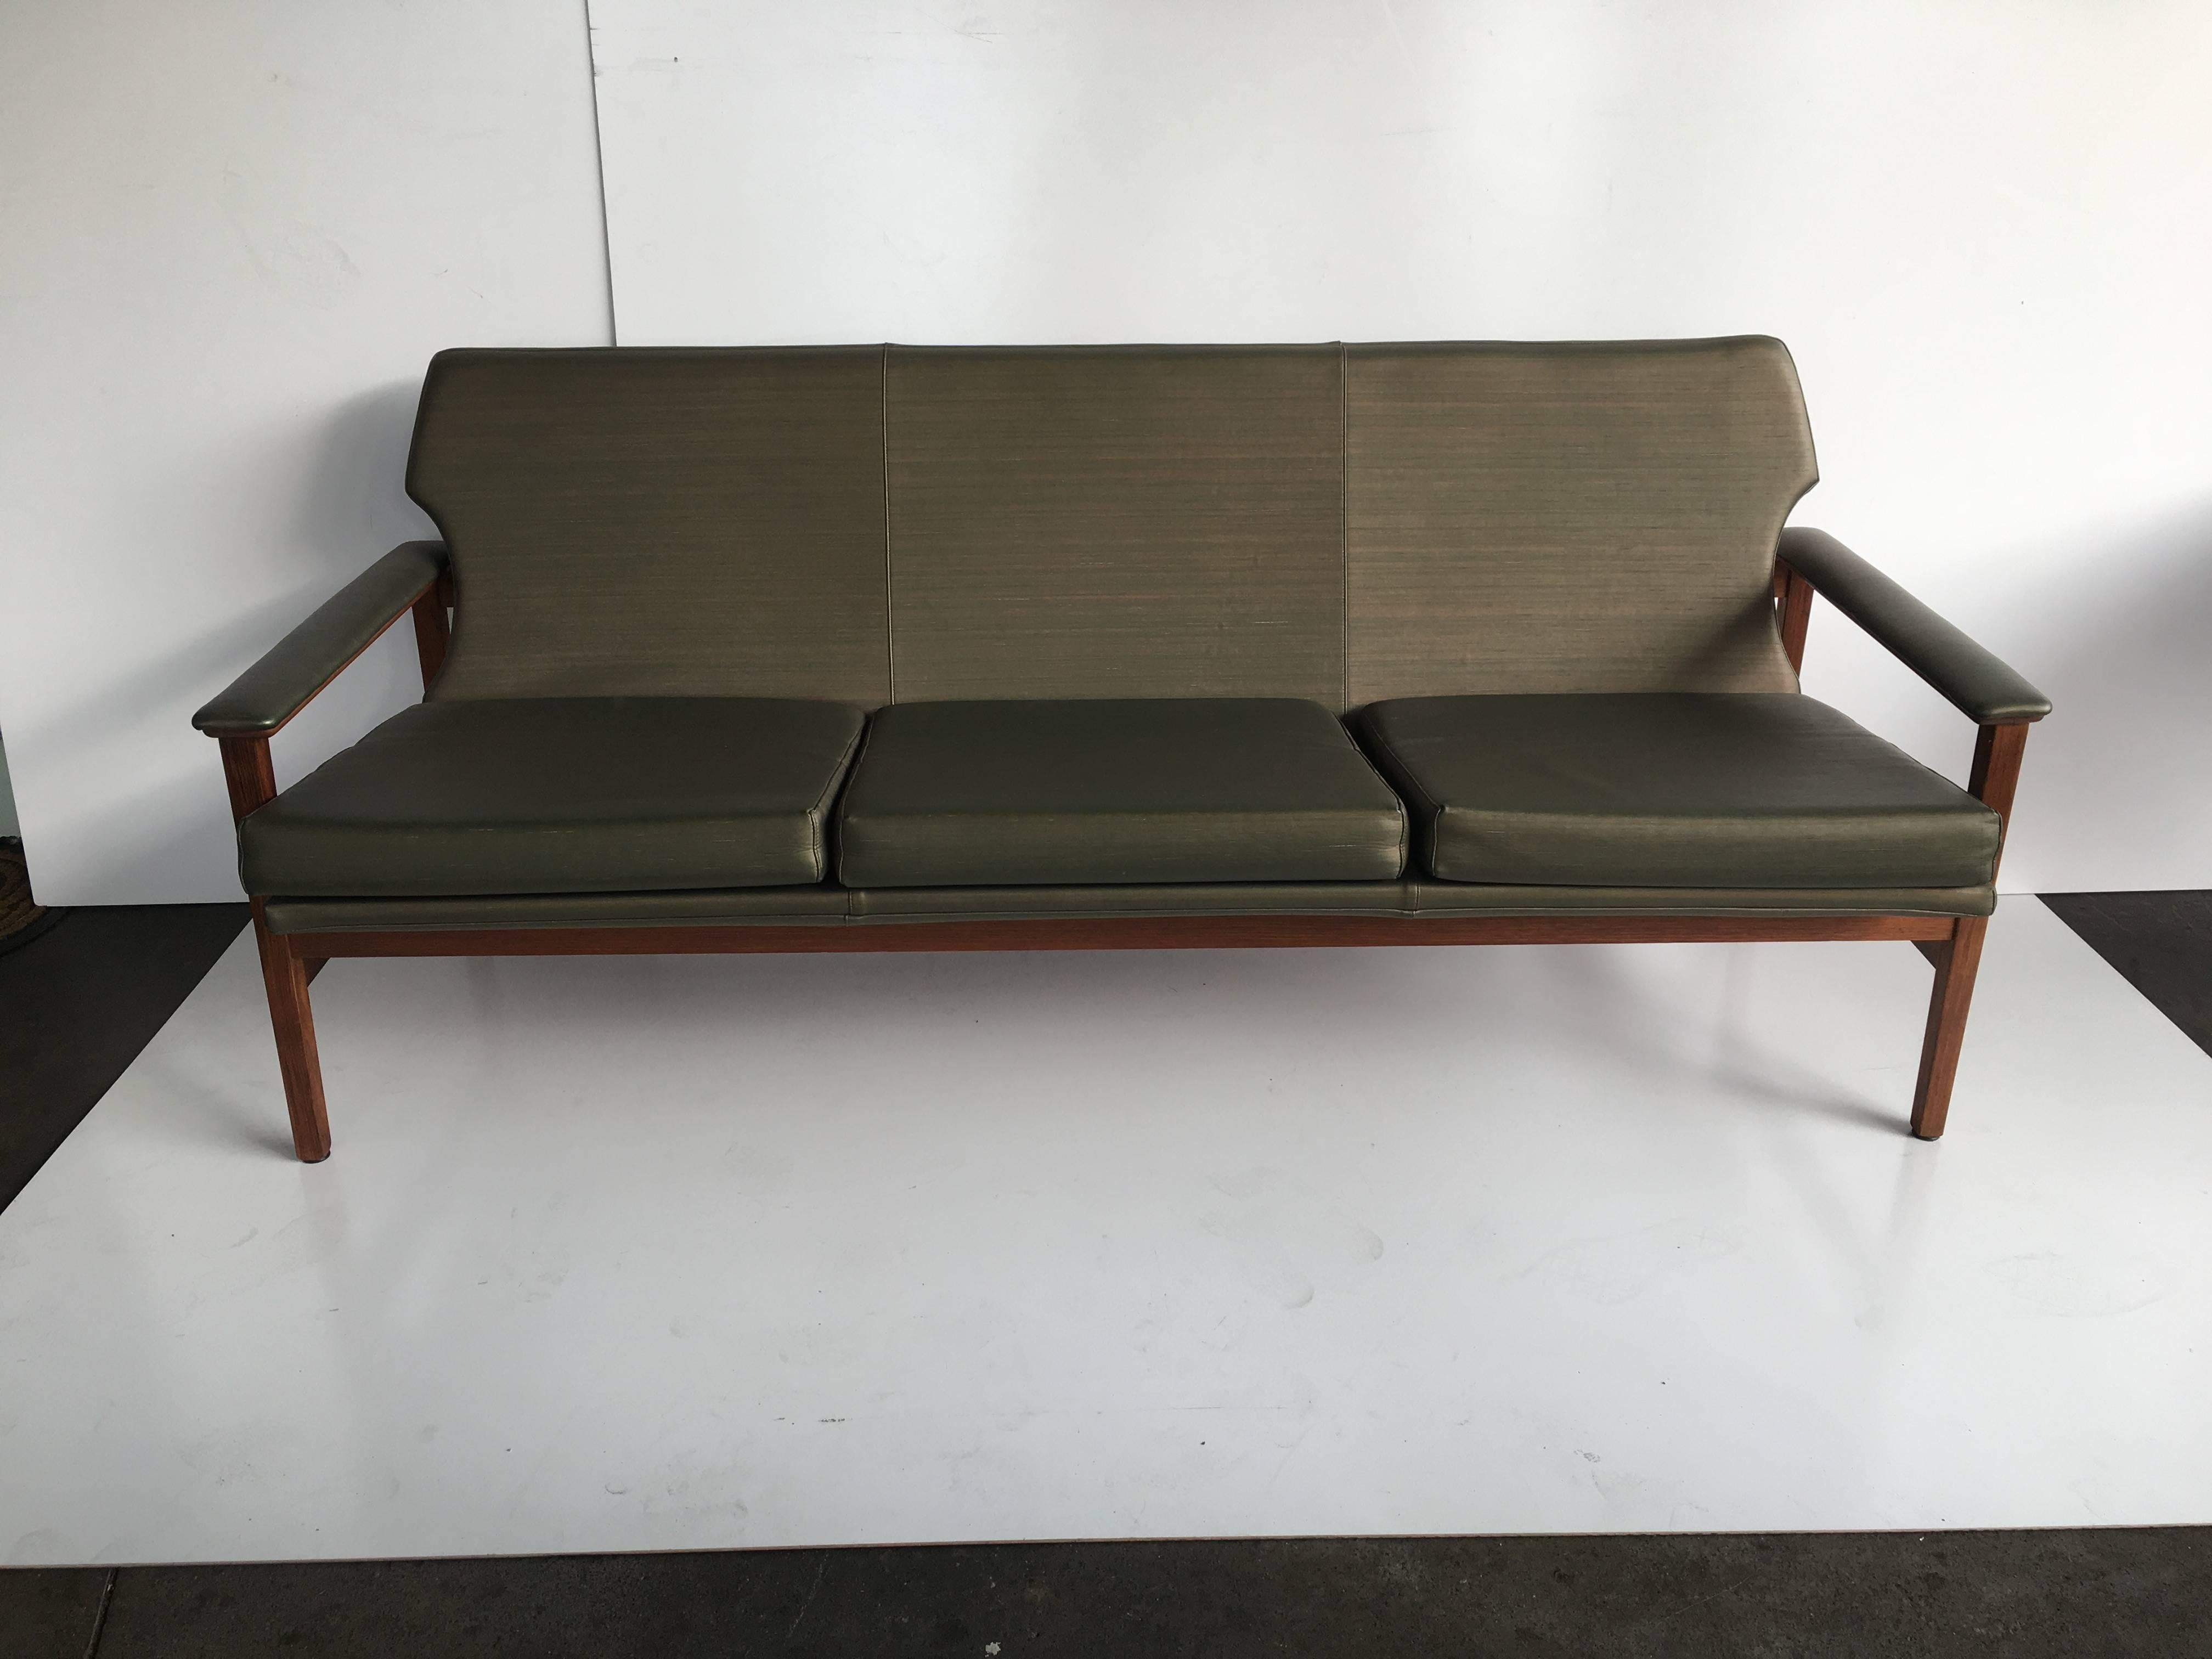 Exceptionally stylish lounge suite by renowned Australian maker TH Brown.

Comprises three-seat and two 